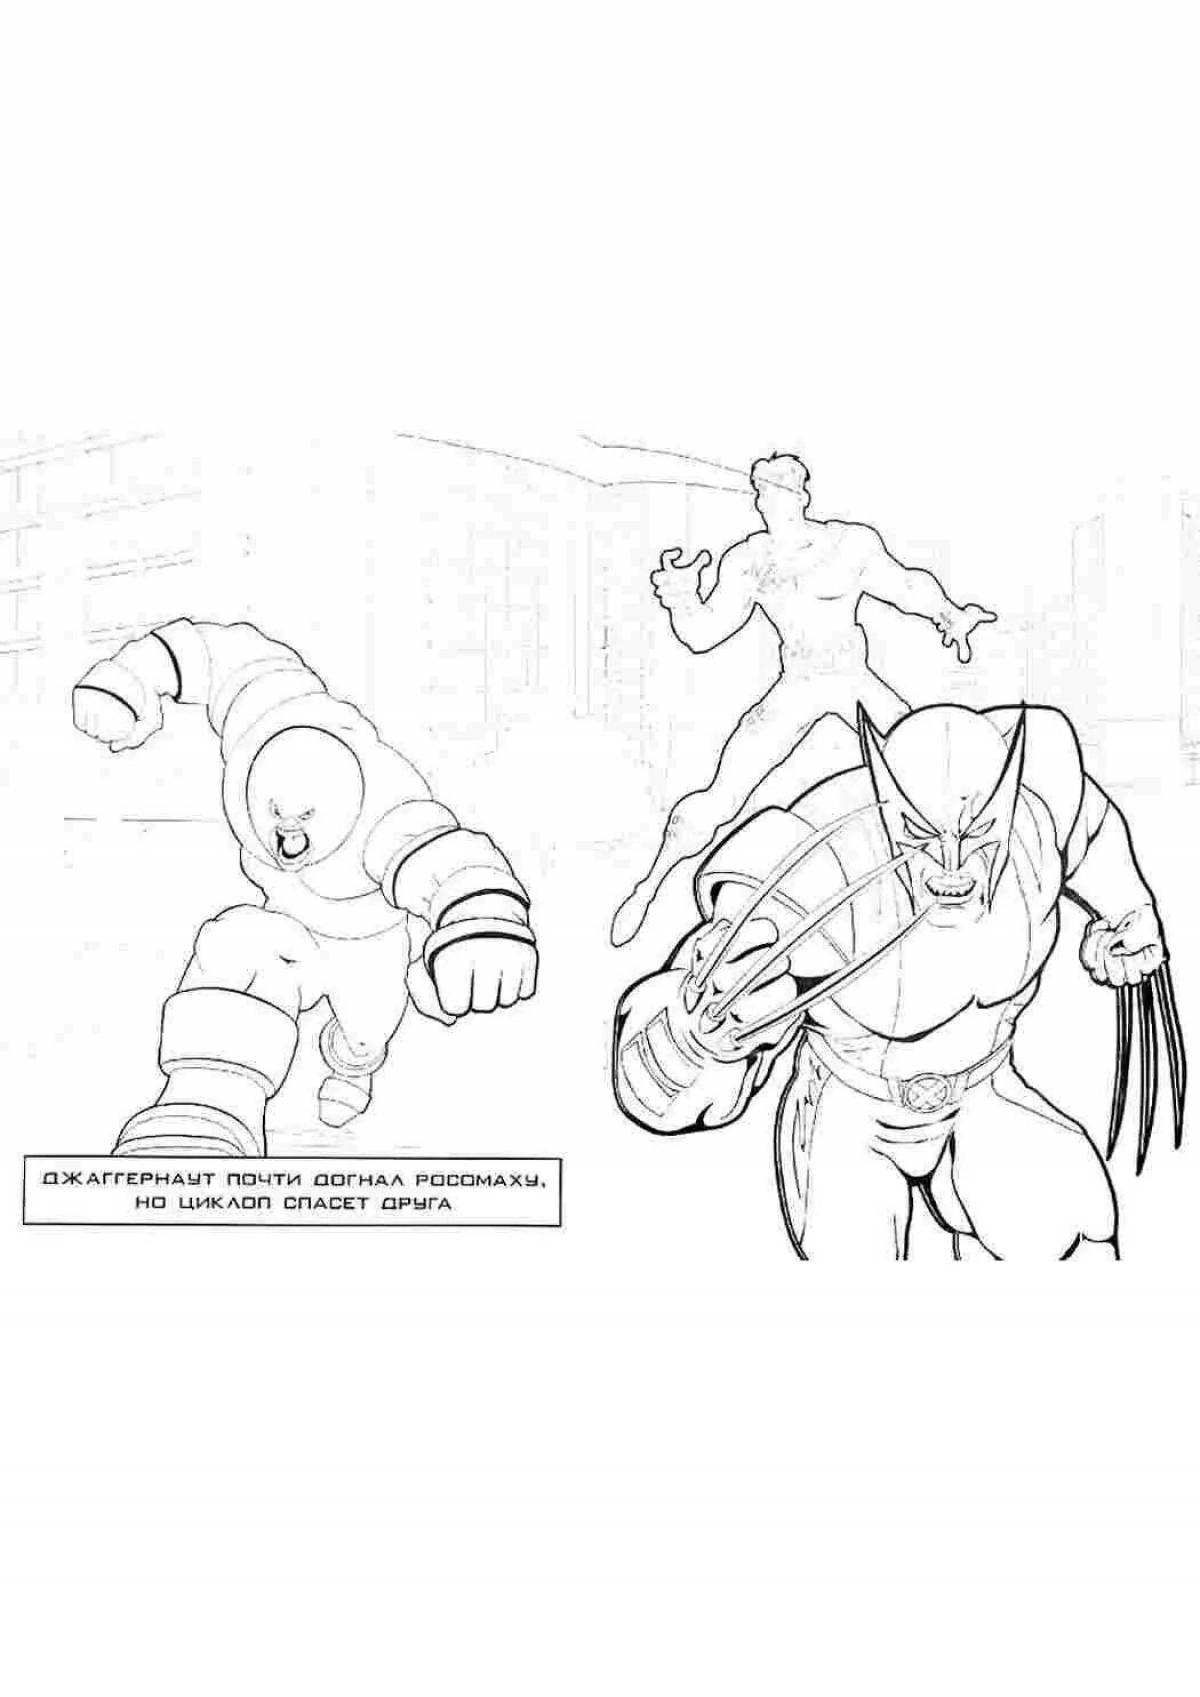 Great wolverine coloring book for kids